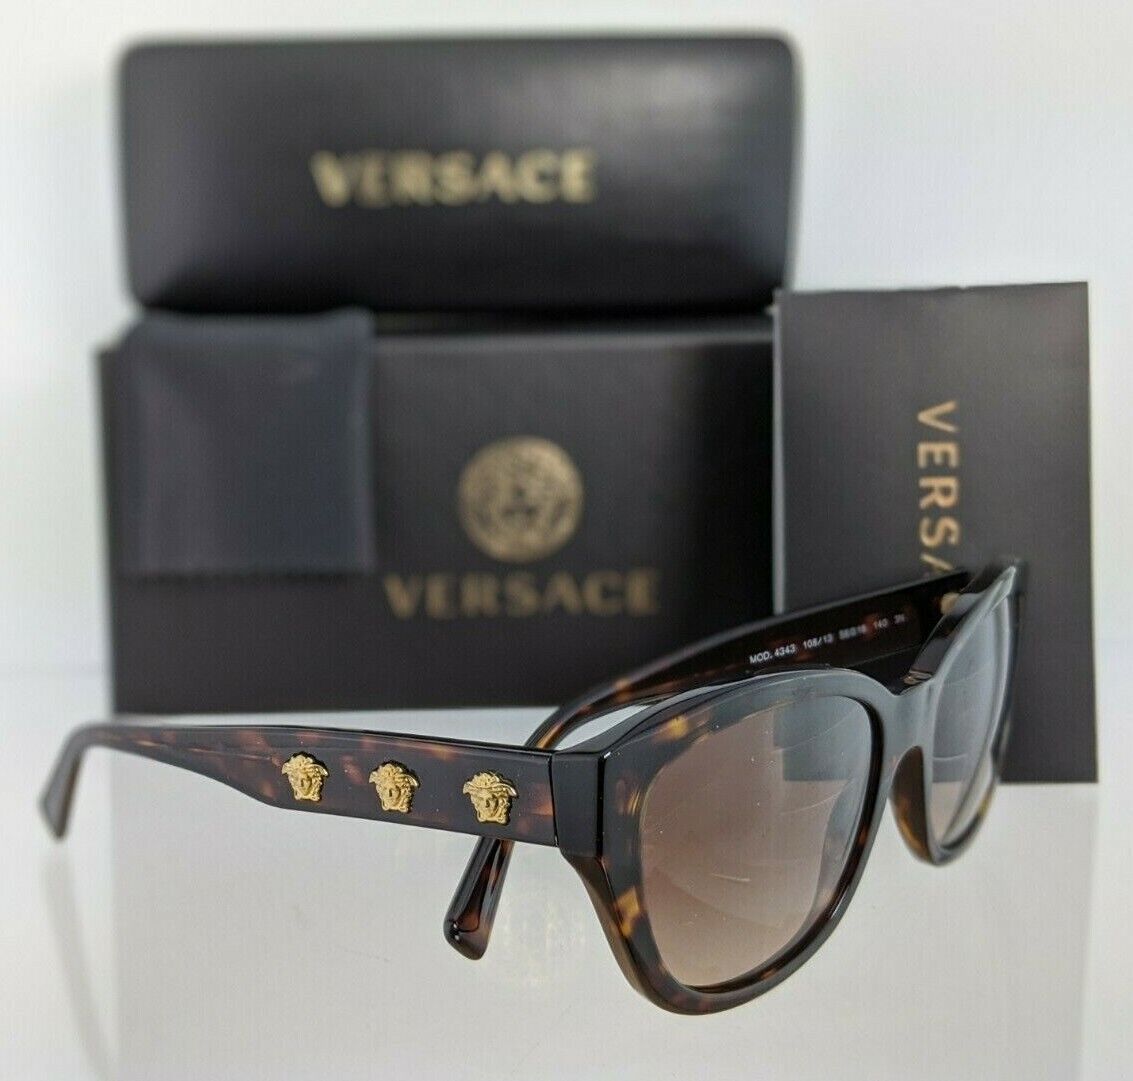 Brand New Authentic Versace Sunglasses Mod. 4343 108/13 56mm Brown Frame